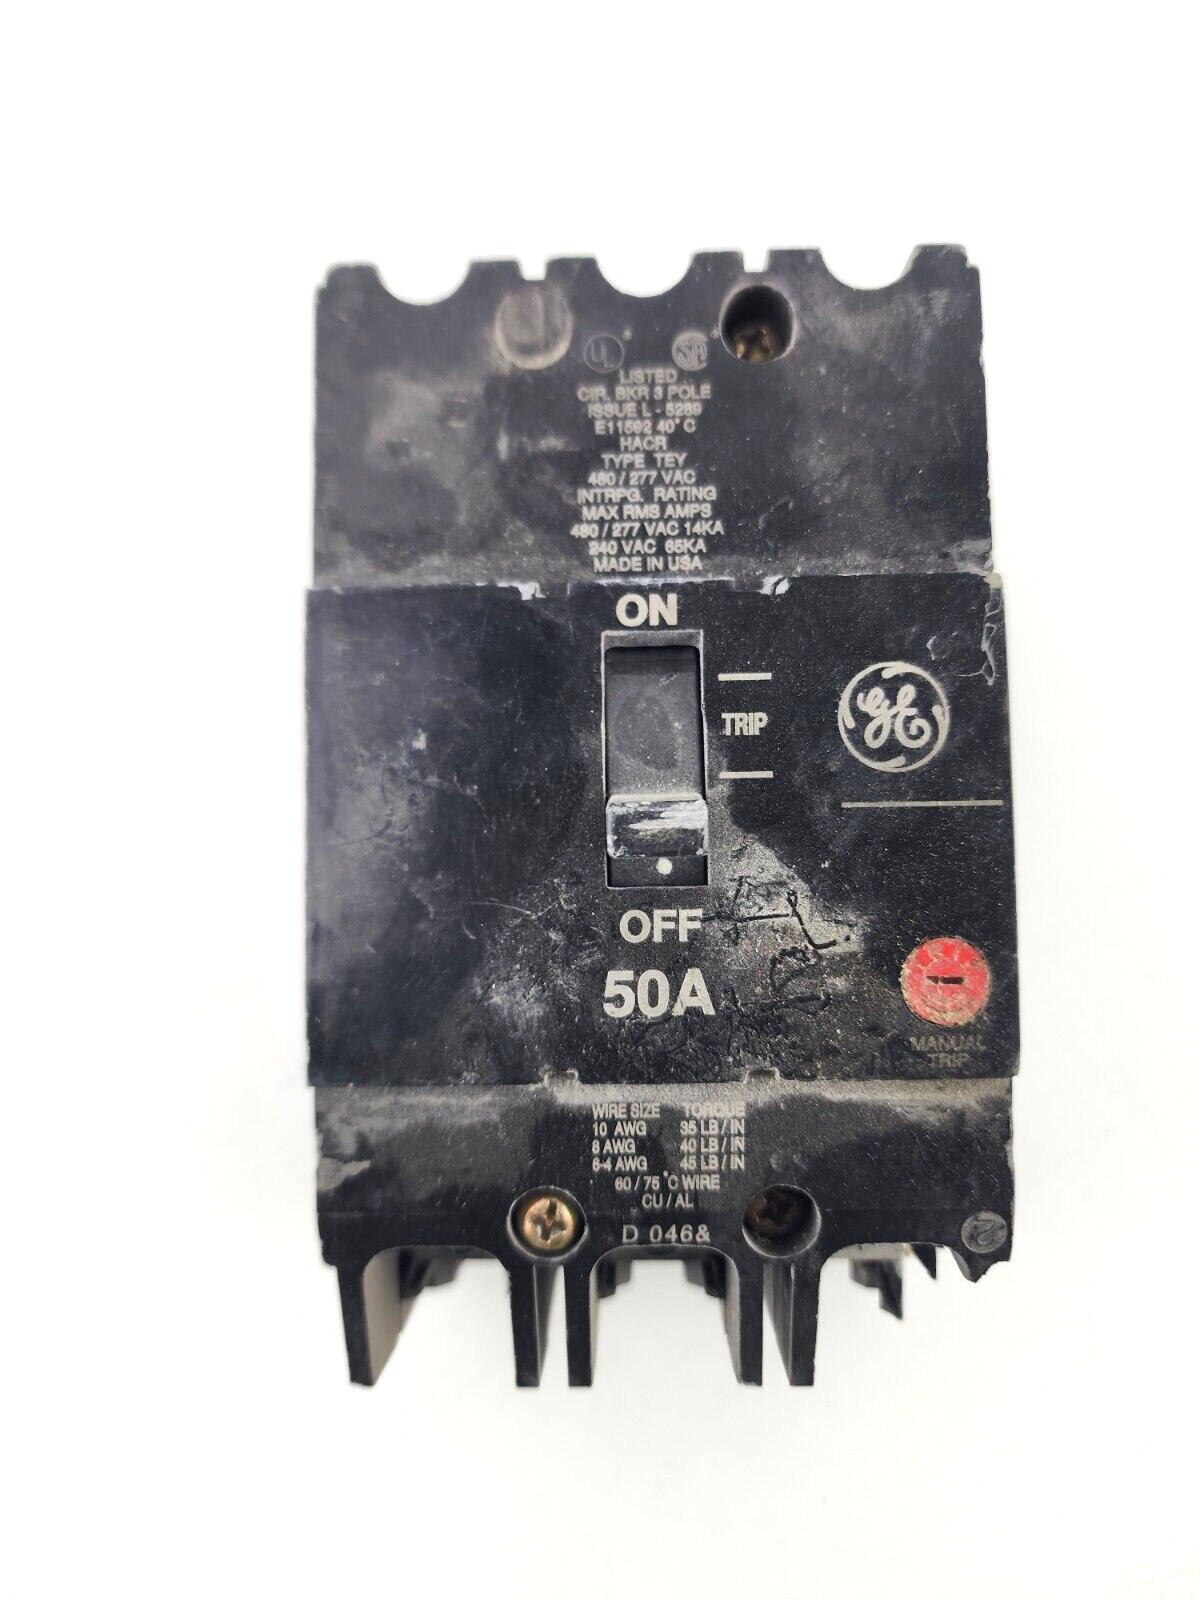 Used GE General Electric 3 Pole Circuit Breaker 50A 480/277VAC E11592 Type TEY